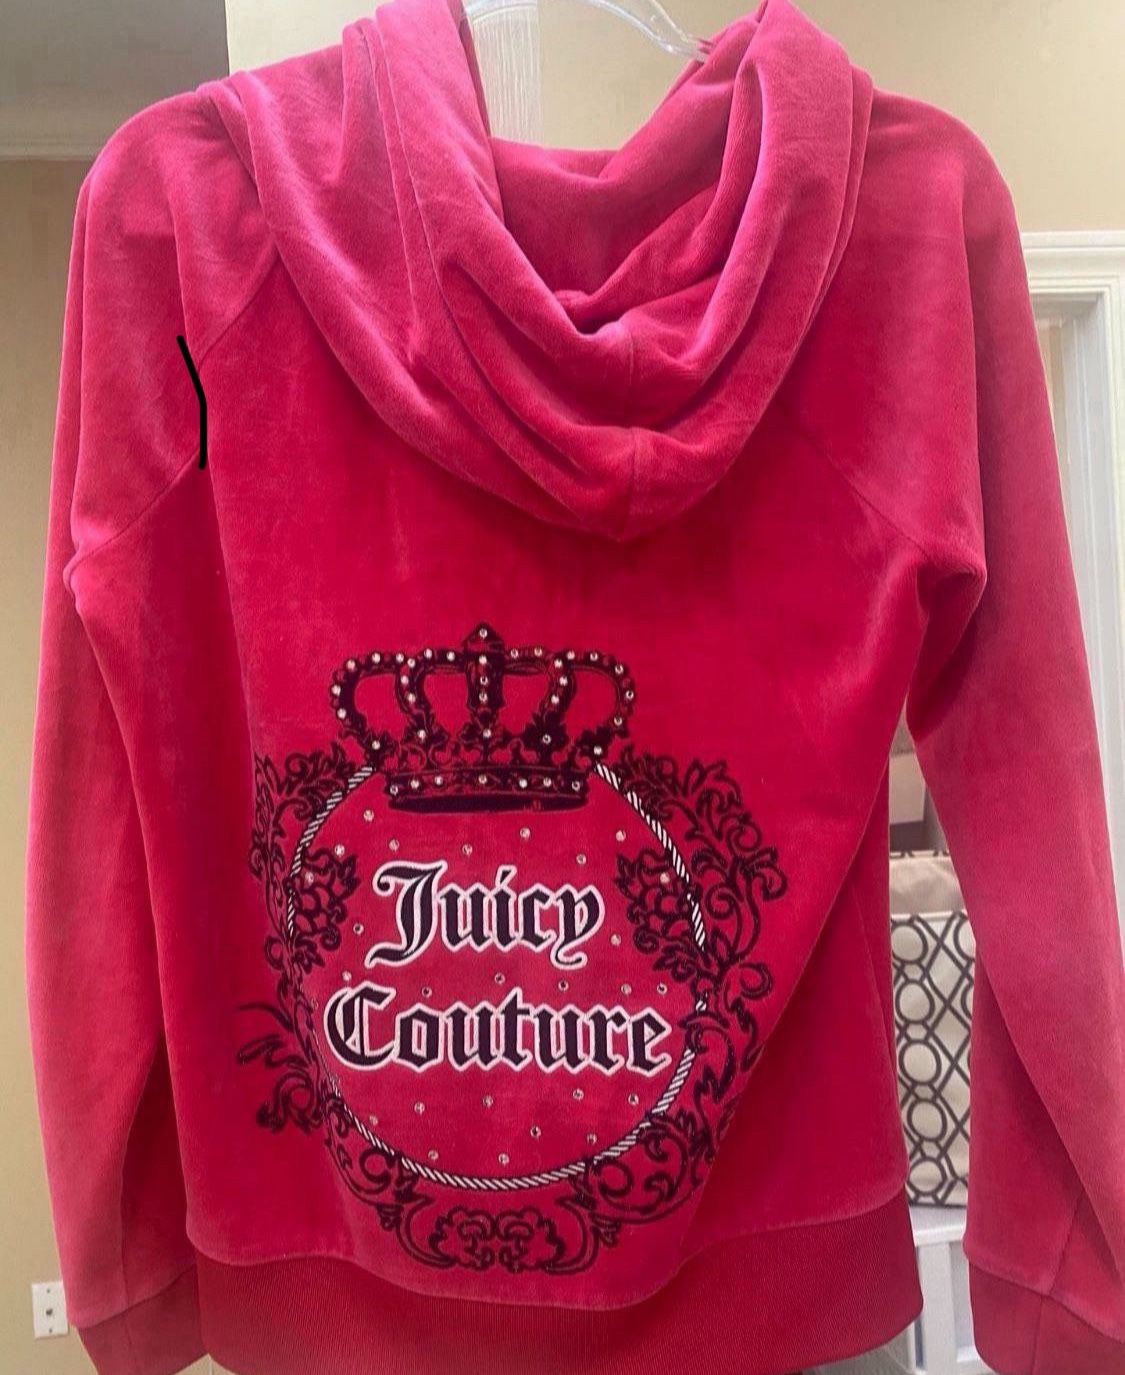 Juicy Couture Womens Jacket Size L